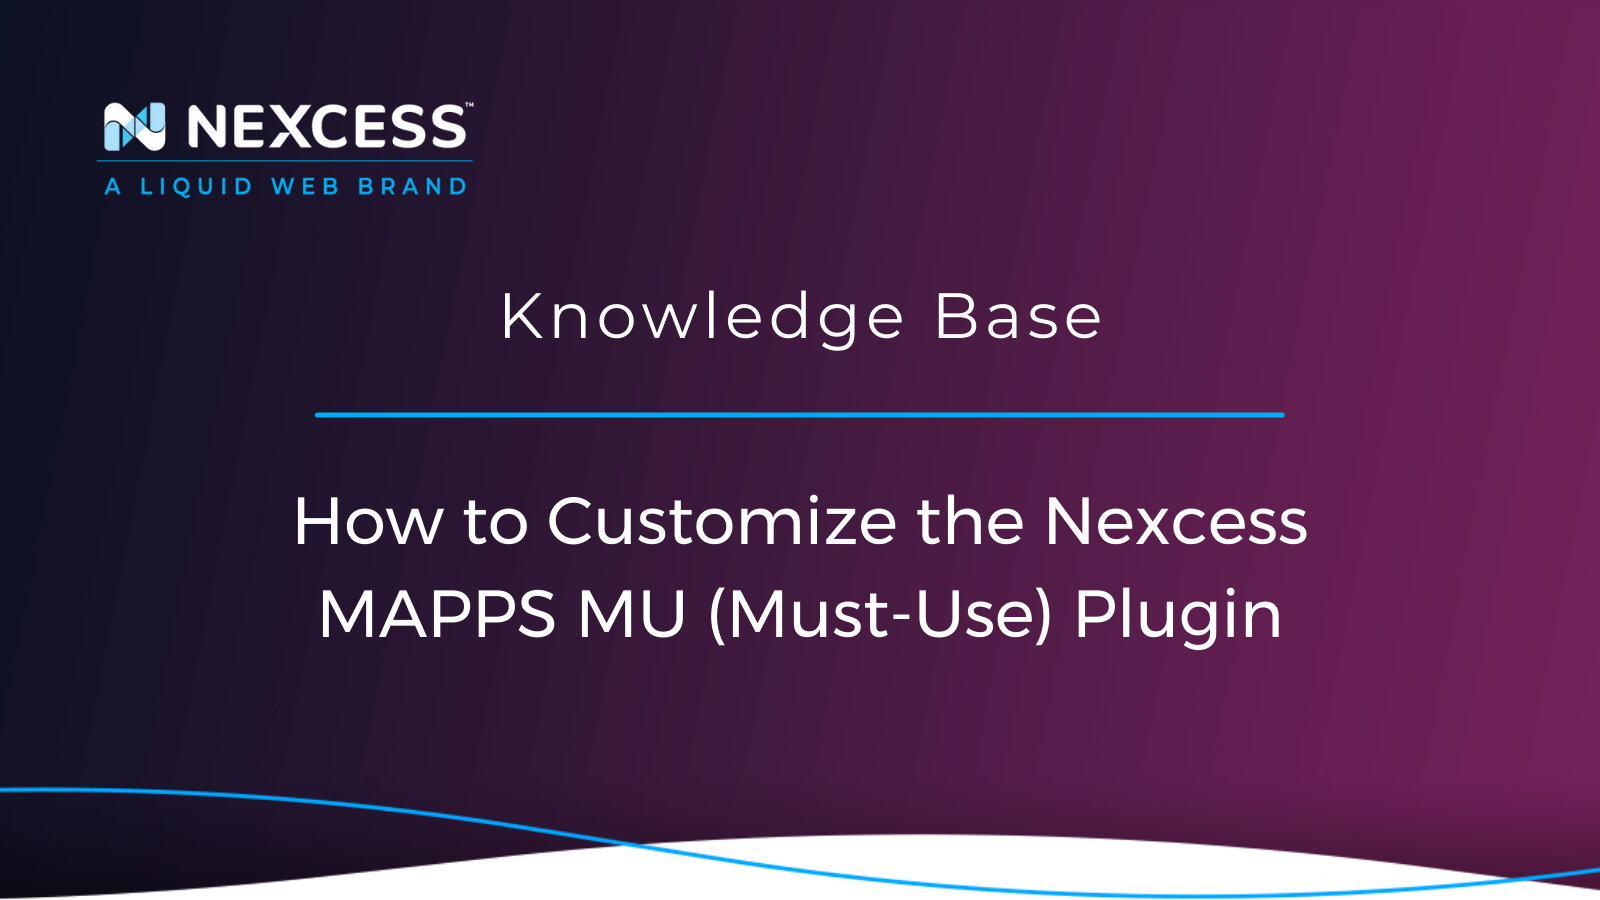 How to Customize the Nexcess MAPPS MU (Must-Use) Plugin